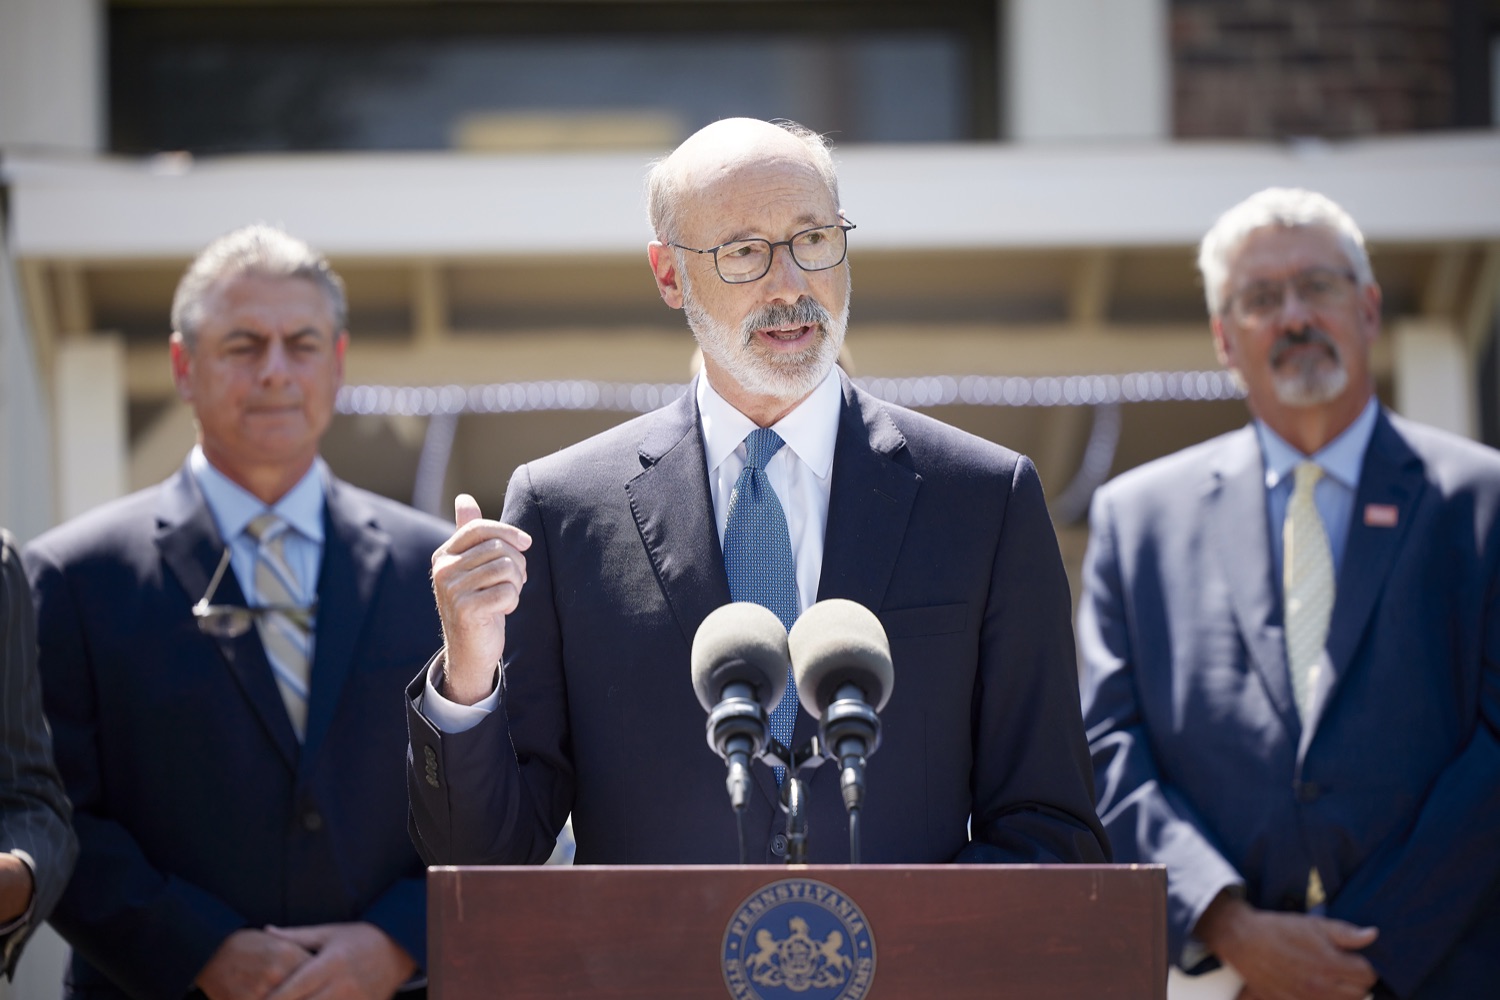 Pennsylvania Governor Tom Wolf speaks with the press.   Governor Tom Wolf was joined by state Representative David Delloso and stakeholders and community members to discuss the reintroduction of the PA Opportunity Program, which would send $2,000 checks directly to Pennsylvanians. I first proposed the PA Opportunity Program back in February, but Republican leaders in the General Assembly just wouldnt get on board with funding it in this years budget, said Gov. Wolf. However, as Ive traveled the commonwealth, Ive heard directly from so many people about how much this program would mean to them and their families. Im not going to stop fighting until the people of Pennsylvania get the help they need and deserve. Folcroft, PA  August 2, 2022<br><a href="https://filesource.amperwave.net/commonwealthofpa/photo/22070_gov_opportunityFund_dz_017.JPG" target="_blank">⇣ Download Photo</a>